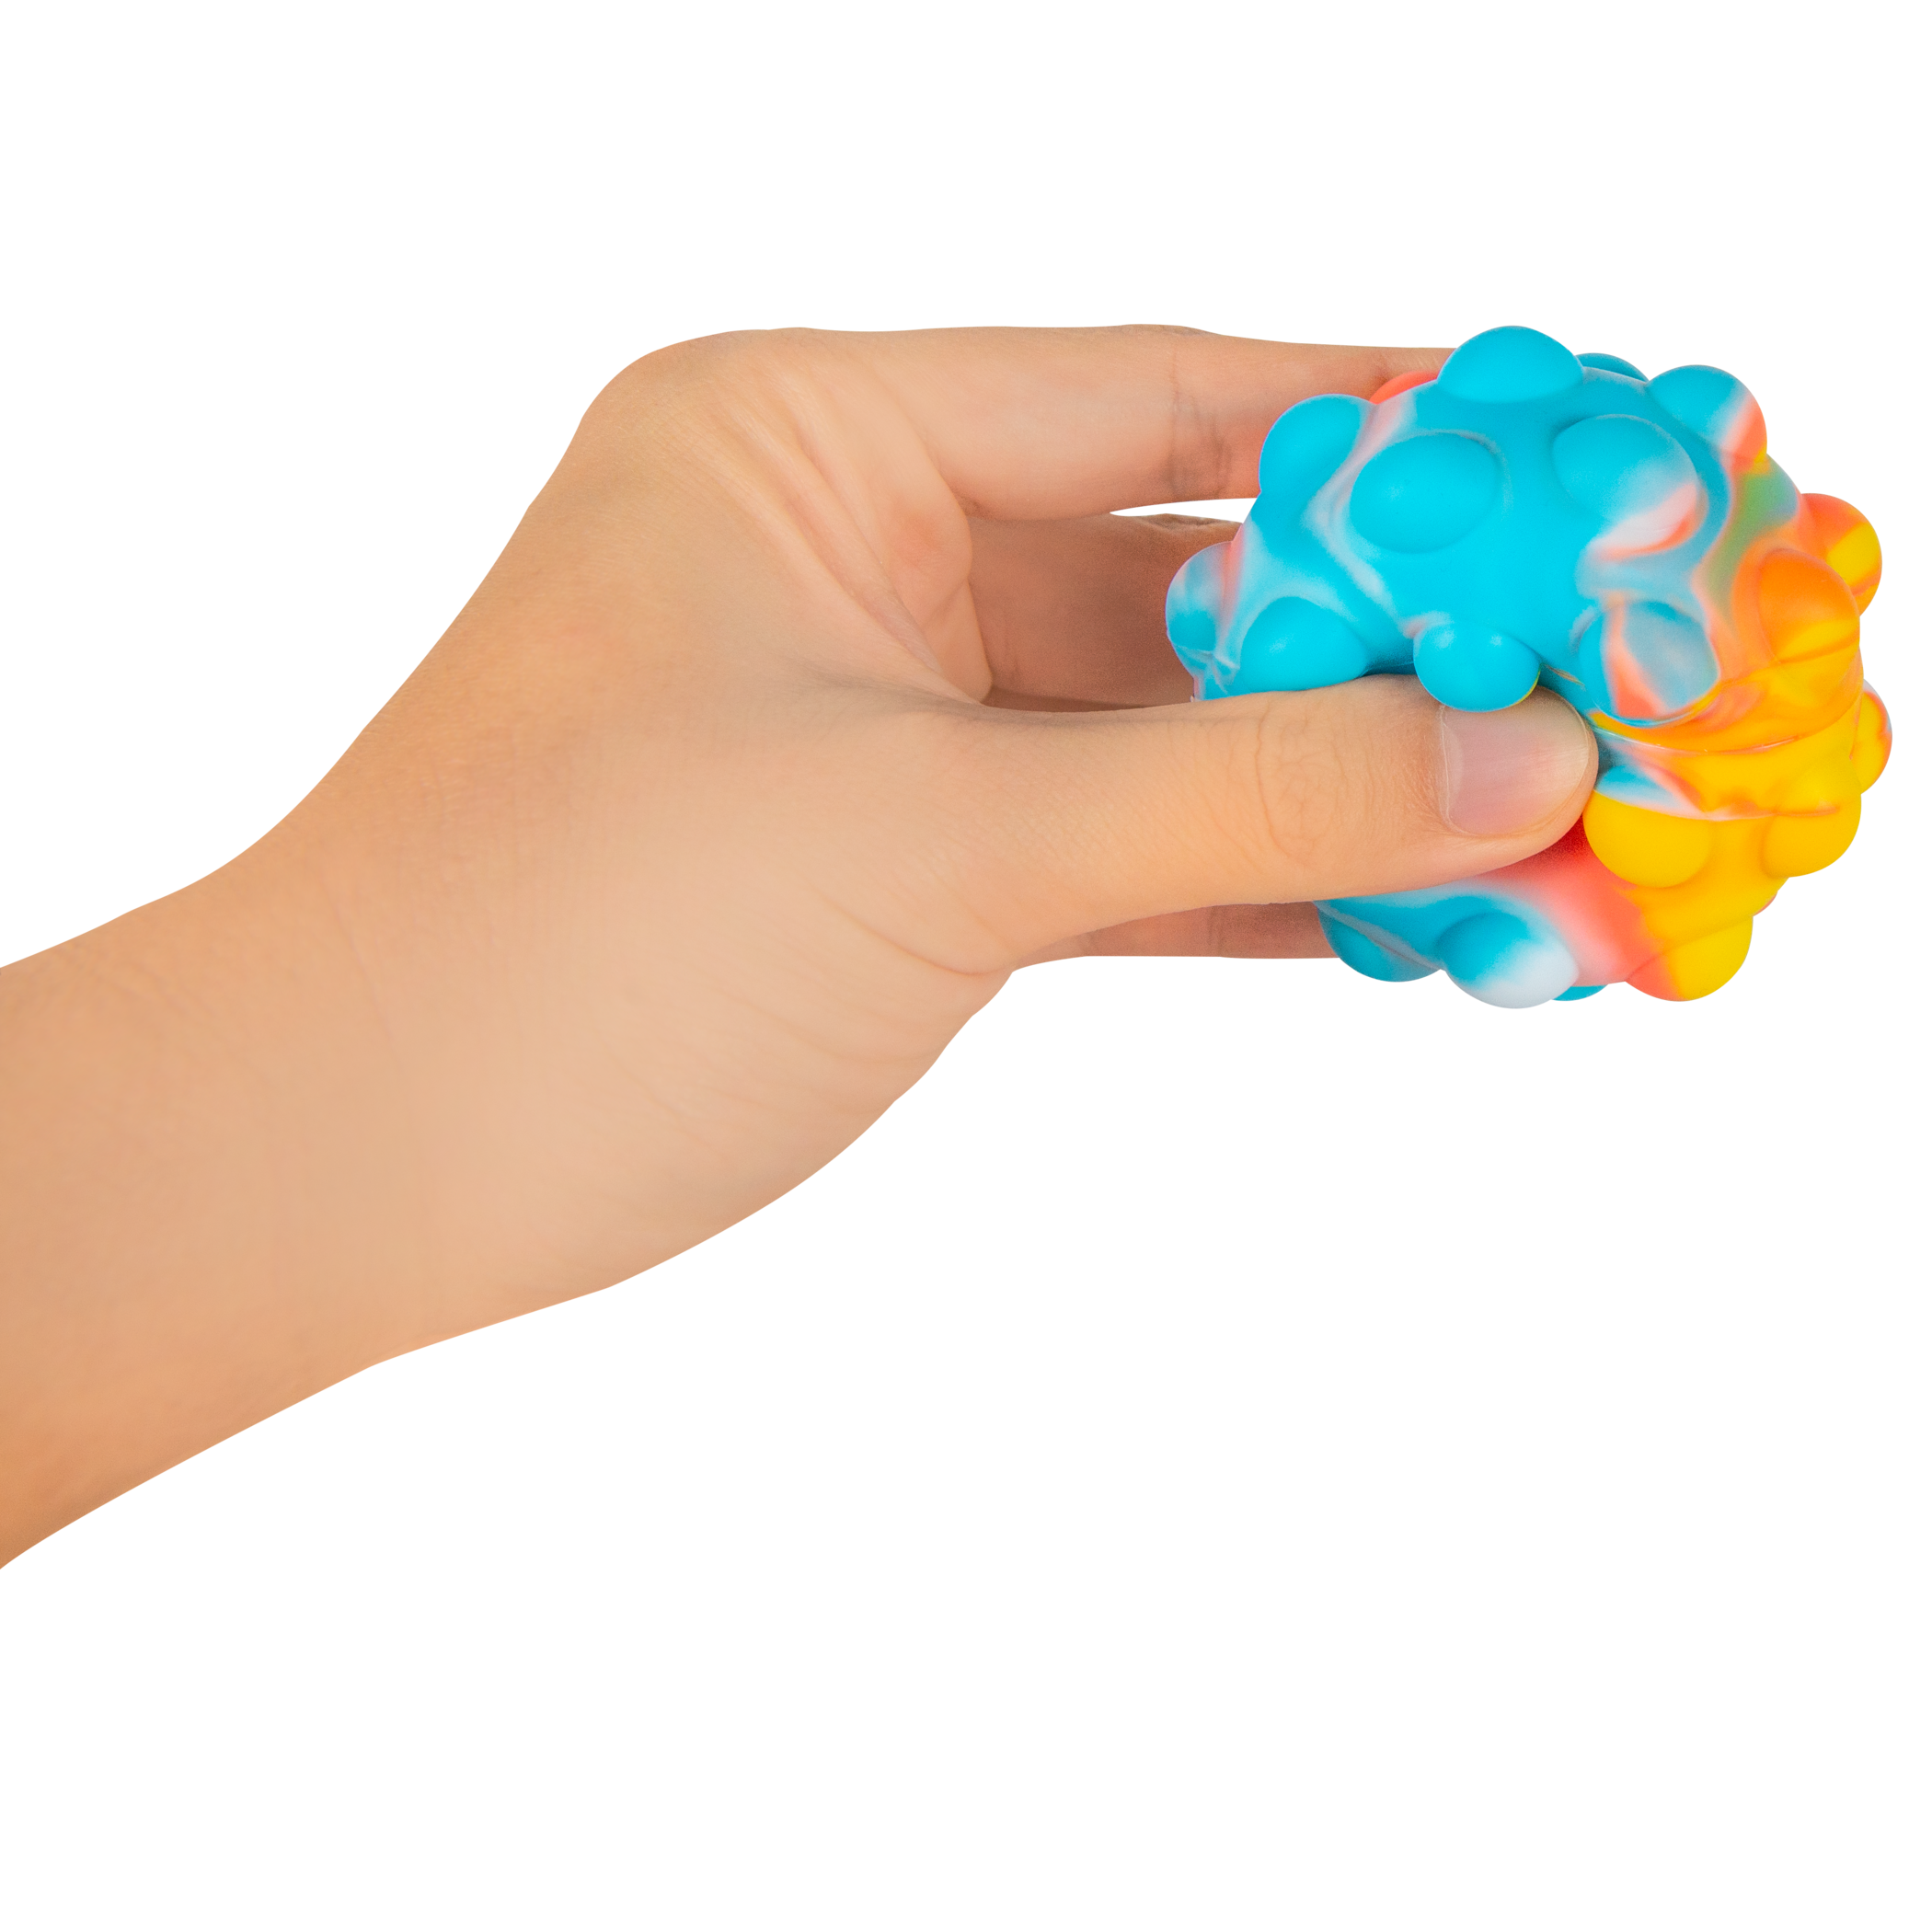 Grin Studios - New toy droppin'!! Or should we say Poppin!??? 😆🙌 Poppie  Ball! is here! A colorfully fun fidget ball you can bounce, squeeze, and pop!  So much fun packed in